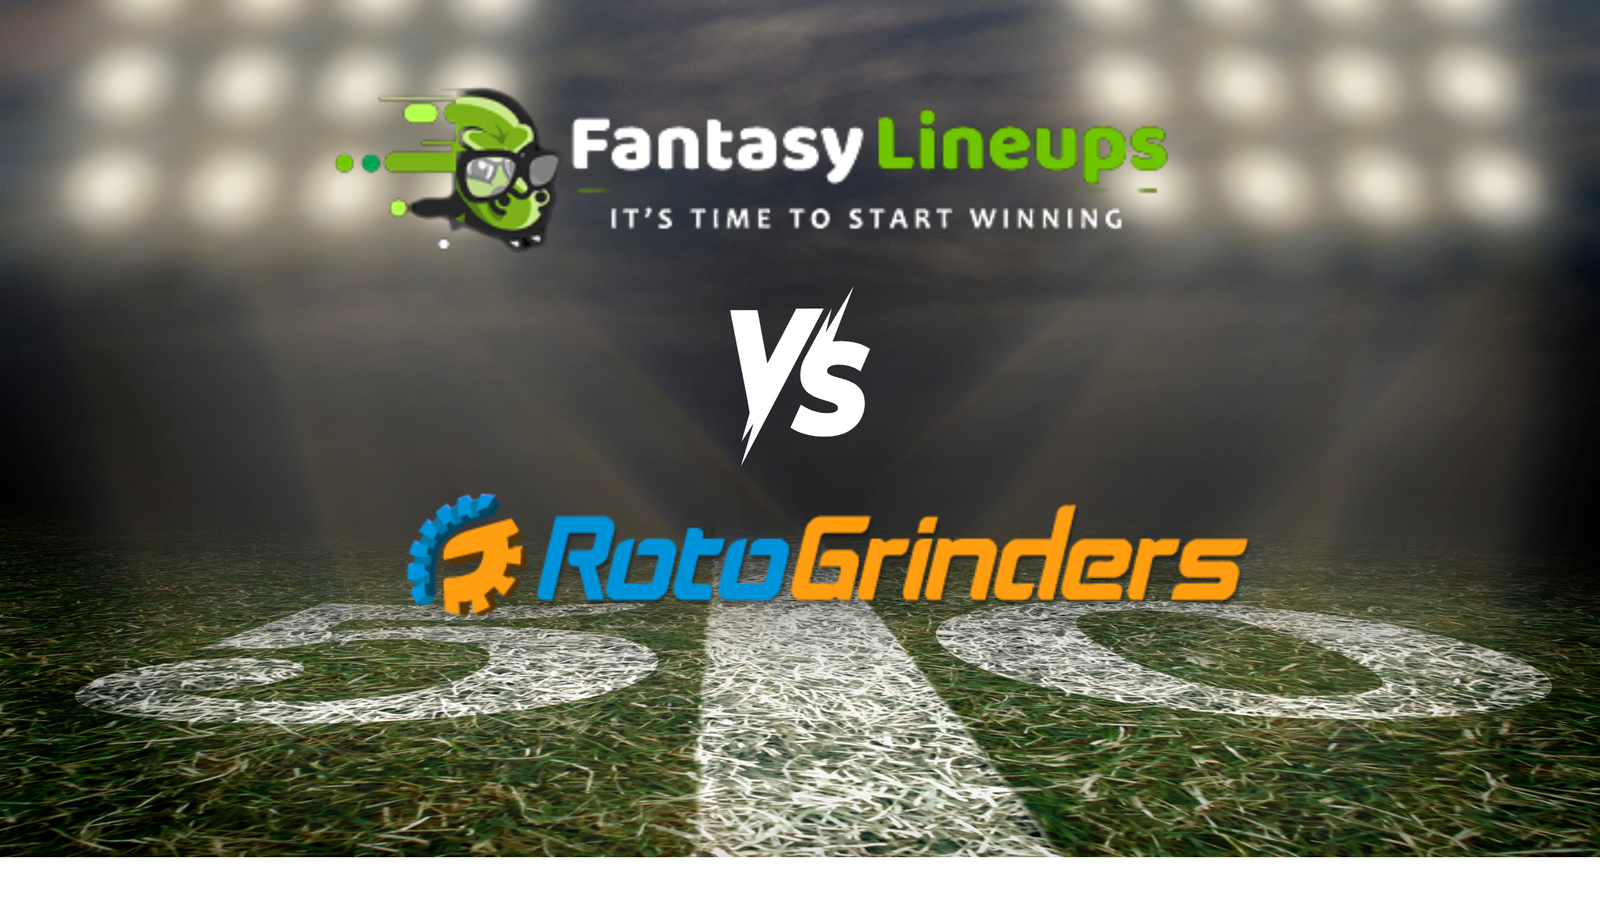 Why Choose Fantasylineups over Rotogrinders